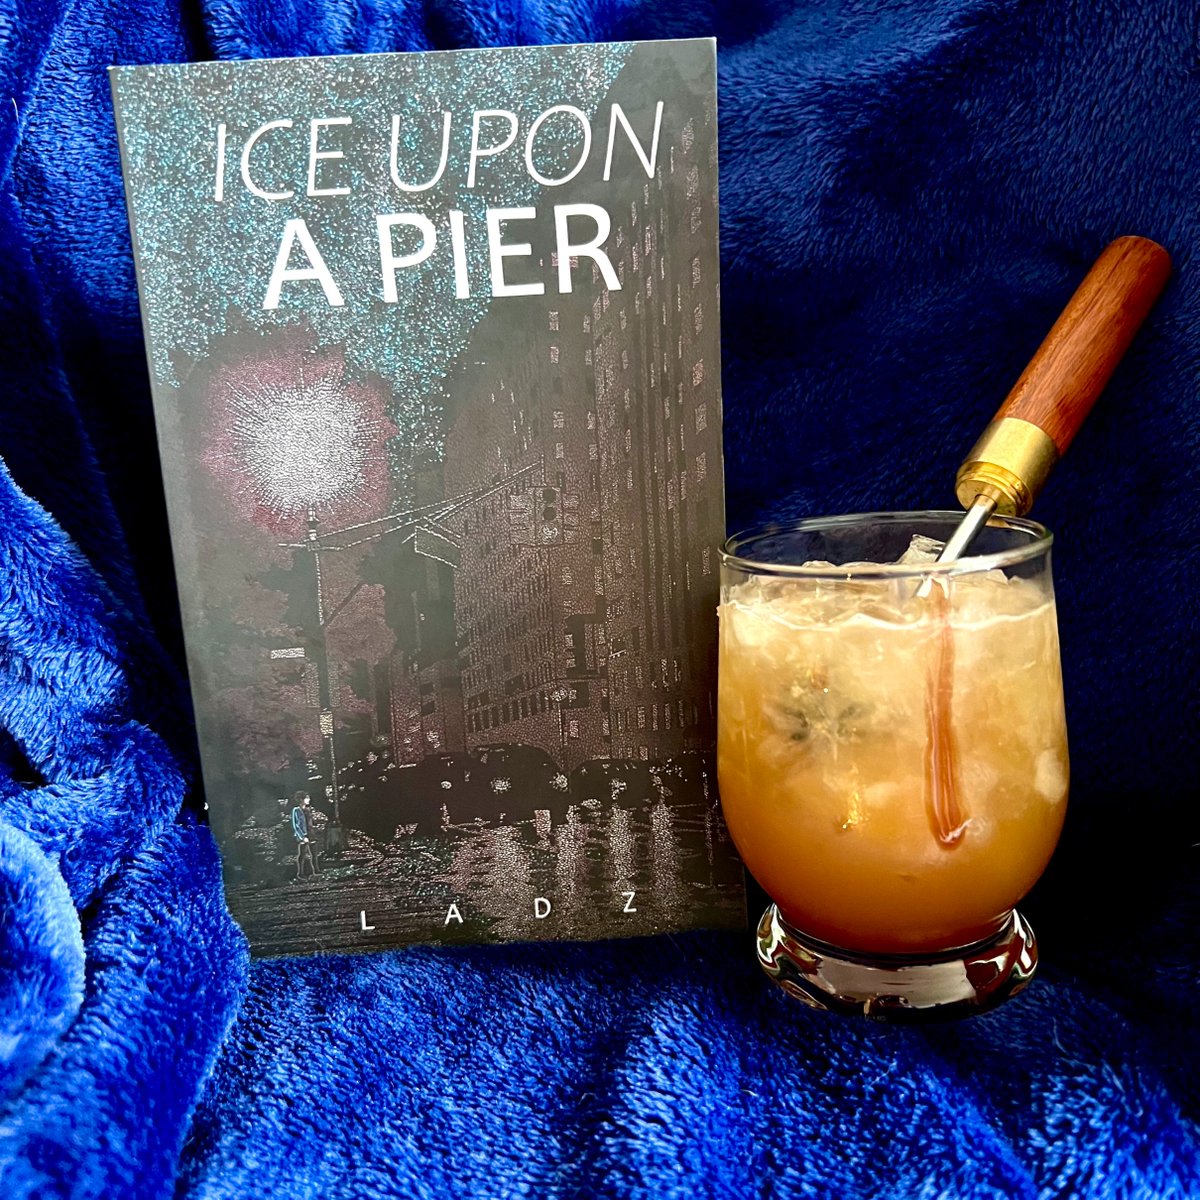 NEW VIDEO ALERT! Today on Bar Cart Bookshelf we're talking about ICE UPON A PIER by Ladz. A fantasy true crime novella: the character study of a lesbian ice mage contract killer thrills & chills. Our drink, the Contract Killer, is a frosty crushed ice cocktail with a fruity edge.